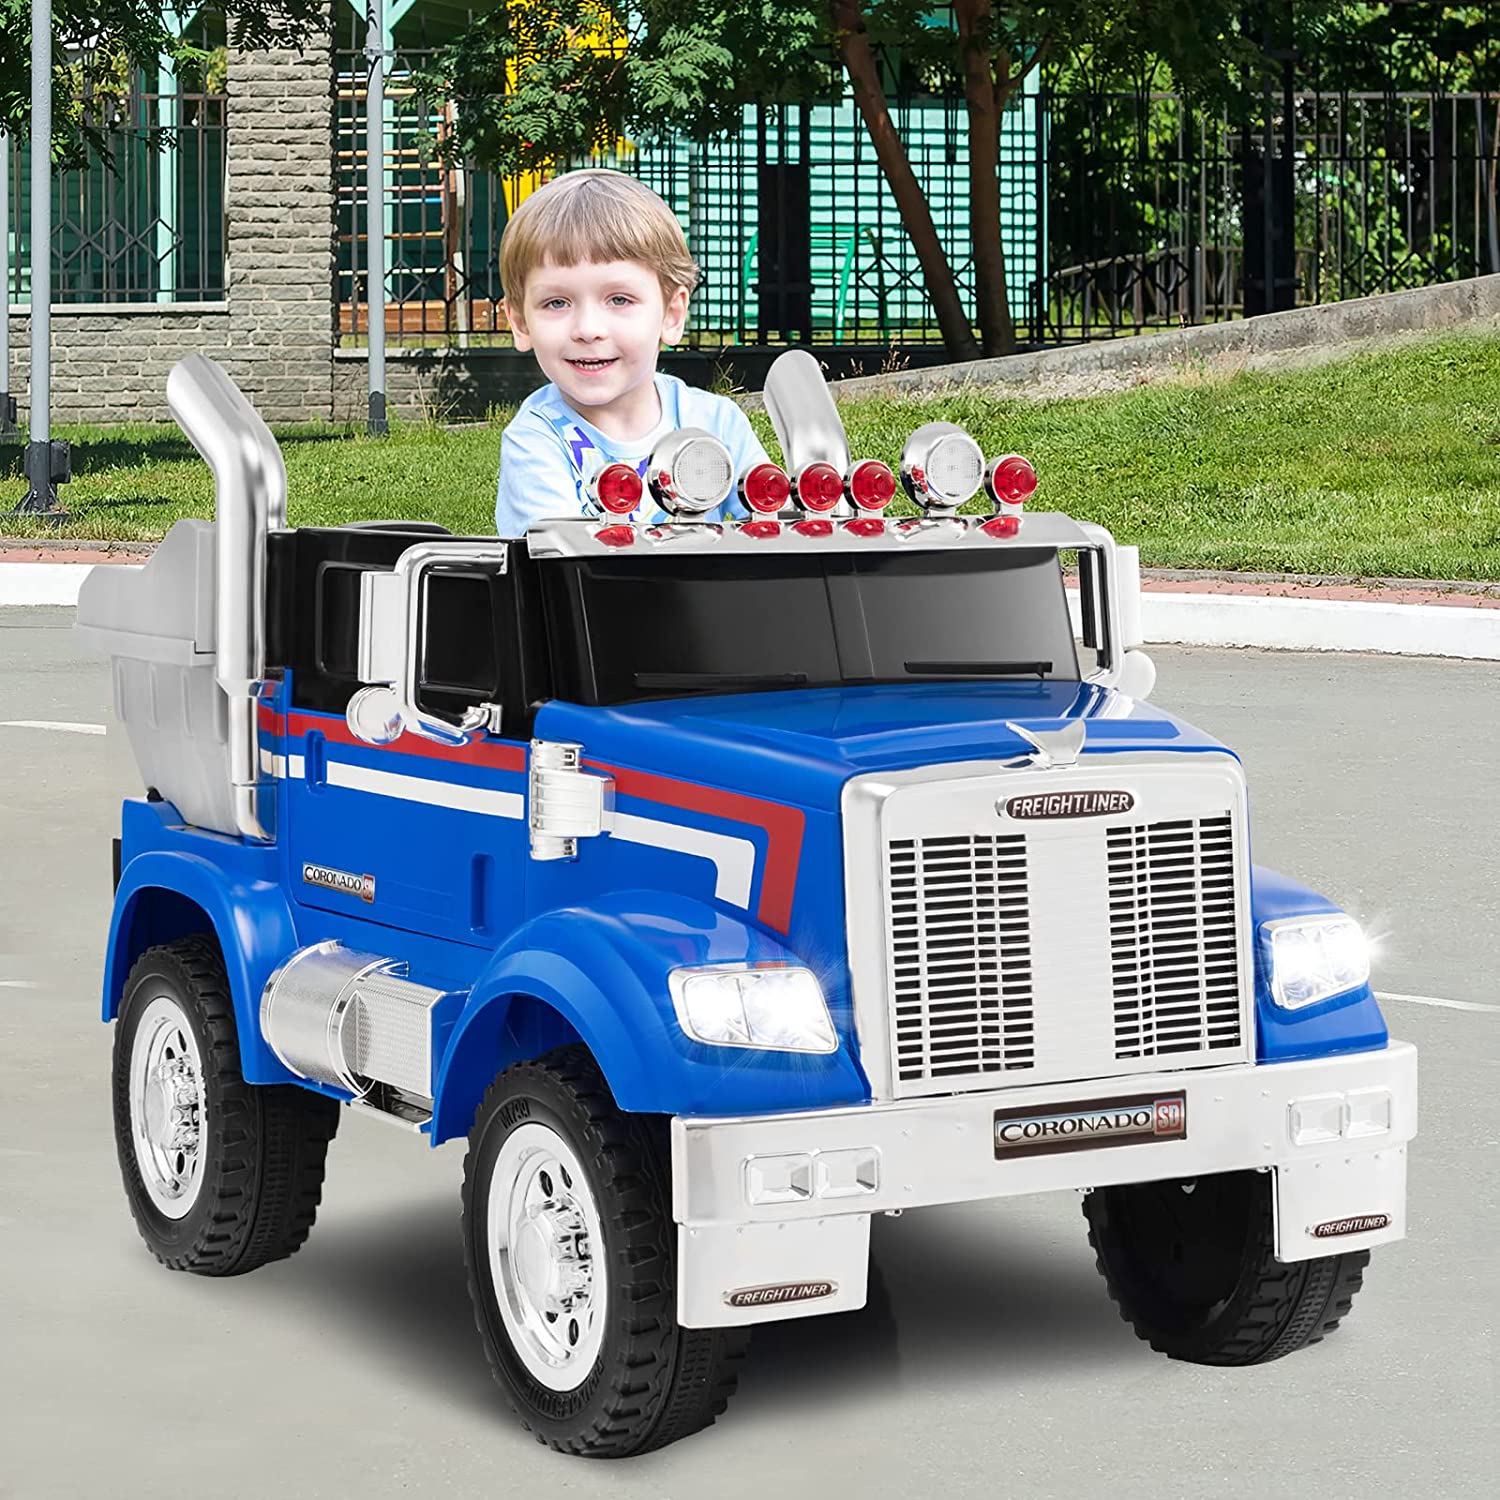 Chairliving 12V Licensed Freightliner Ride-On Dump Truck Electric Toy Car with Remote Control Rear Loader